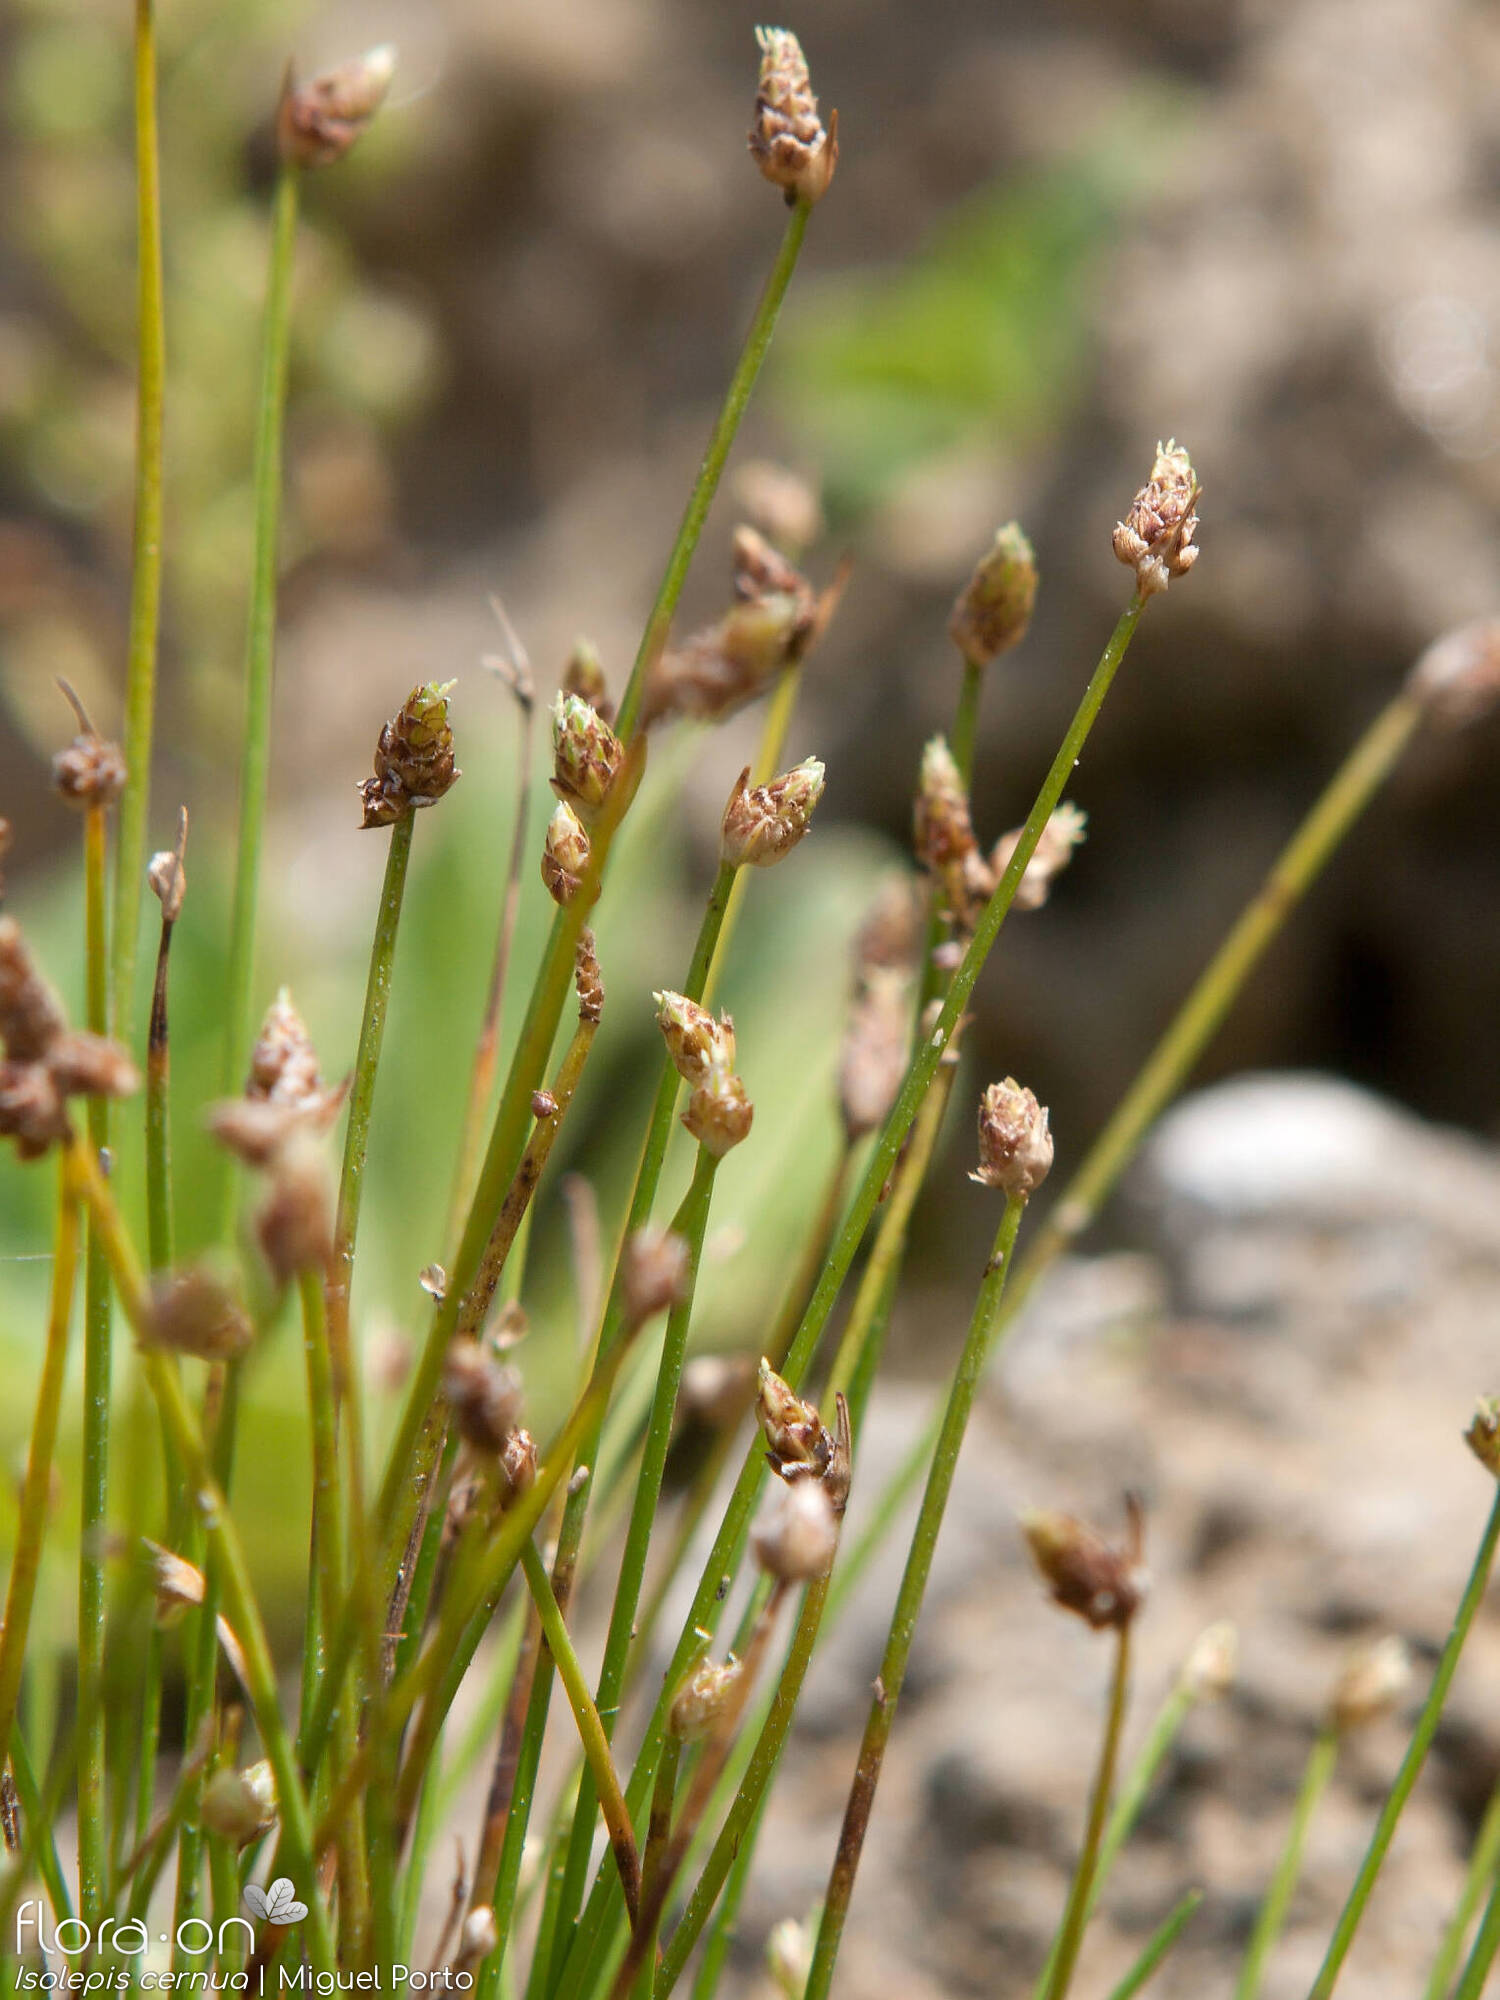 Isolepis cernua - Flor (geral) | Miguel Porto; CC BY-NC 4.0